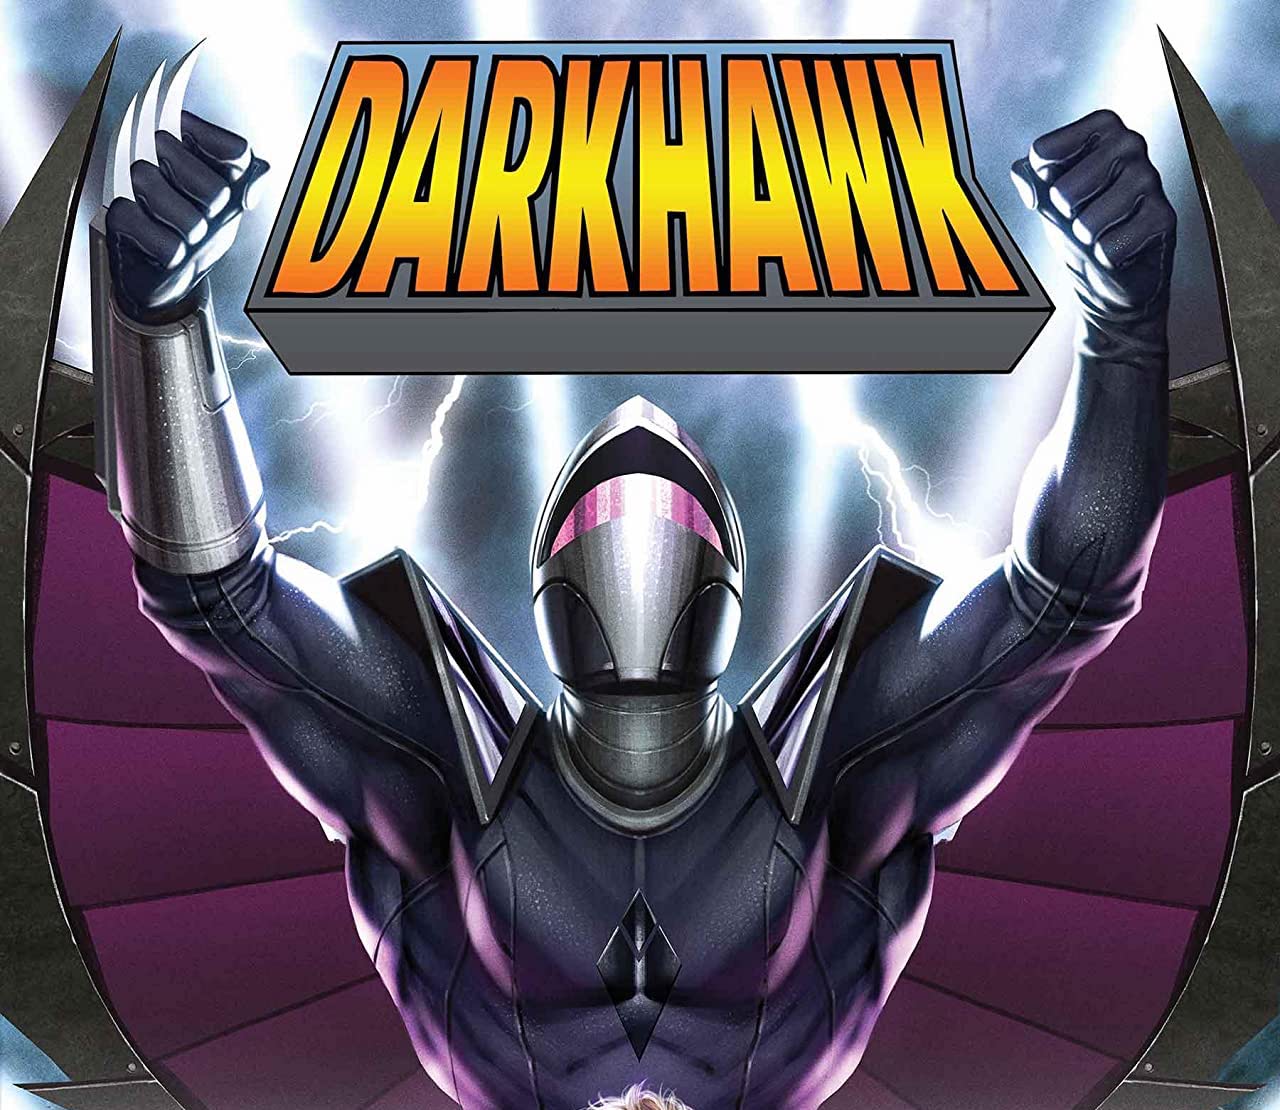 'Darkhawk: Heart of the Hawk' #1 cleverly connects three tales